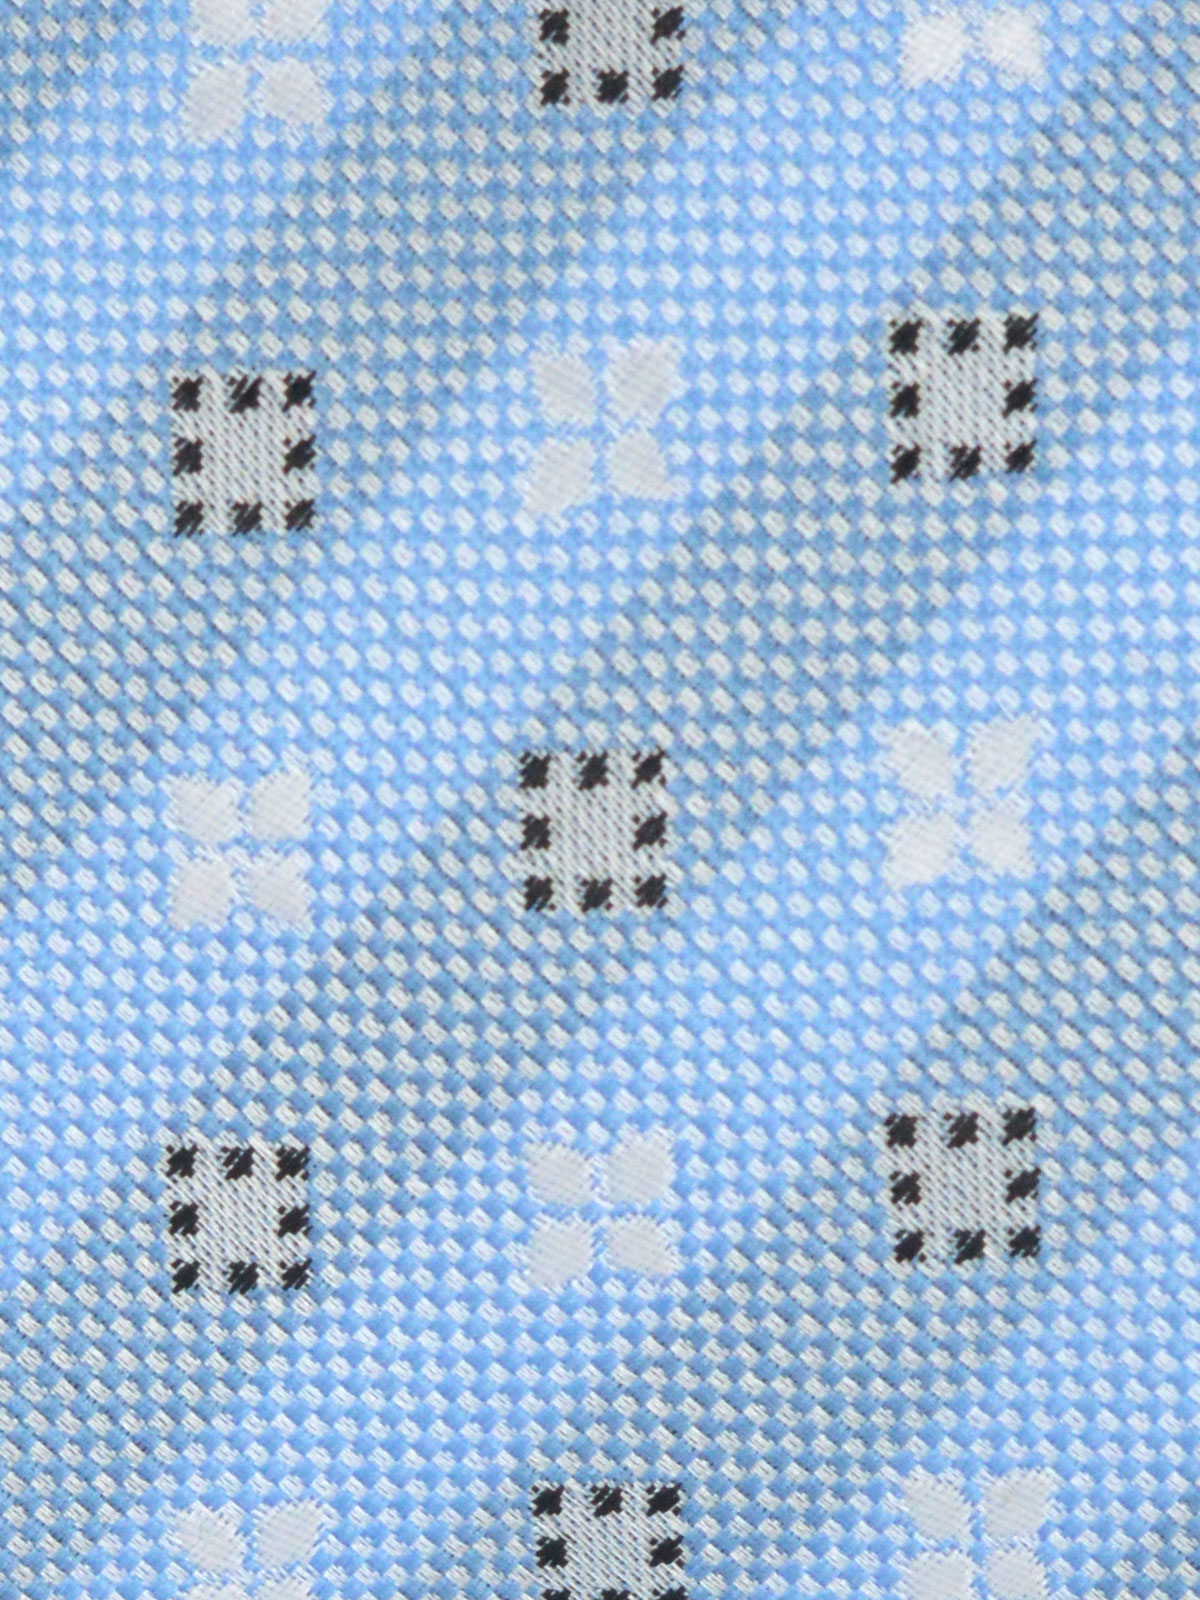  tie in sky blue with dots and square  - 10032 - € 14.06 img2